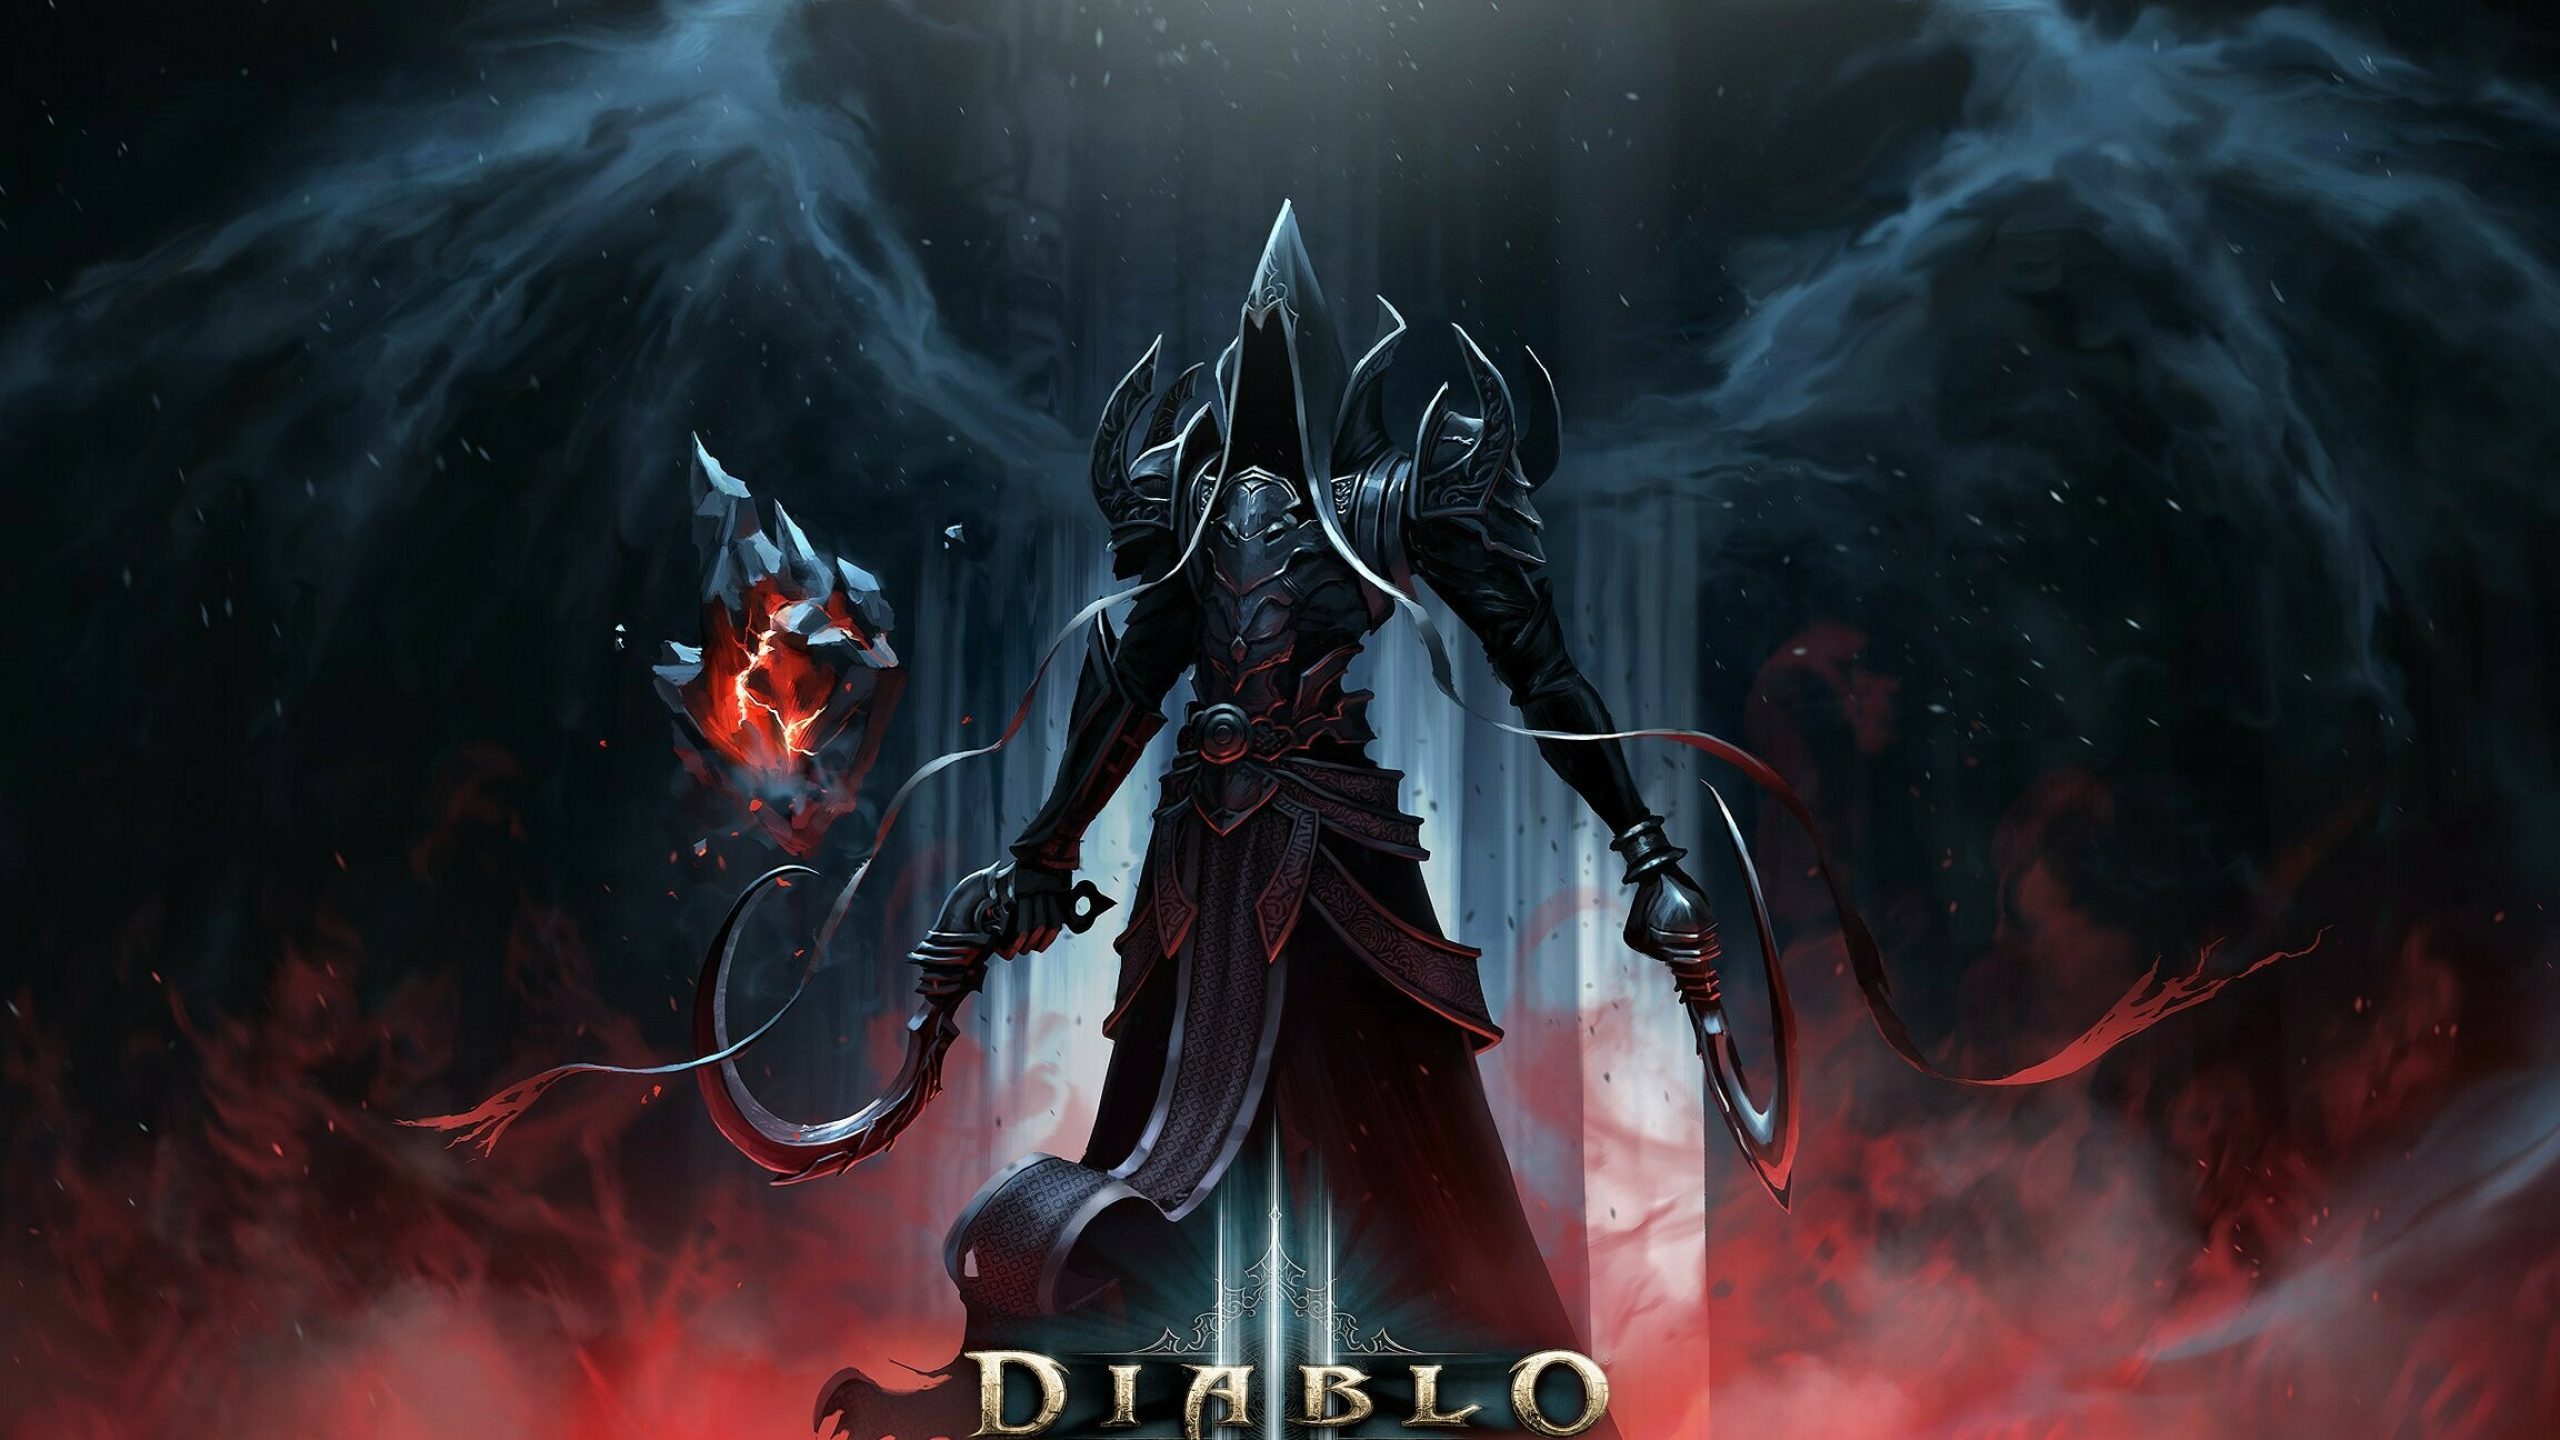 Diablo: Ever since their creation, the angels of the High Heavens and the demons of the Burning Hells have been at war with one another, Action-adventure game. 2560x1440 HD Background.